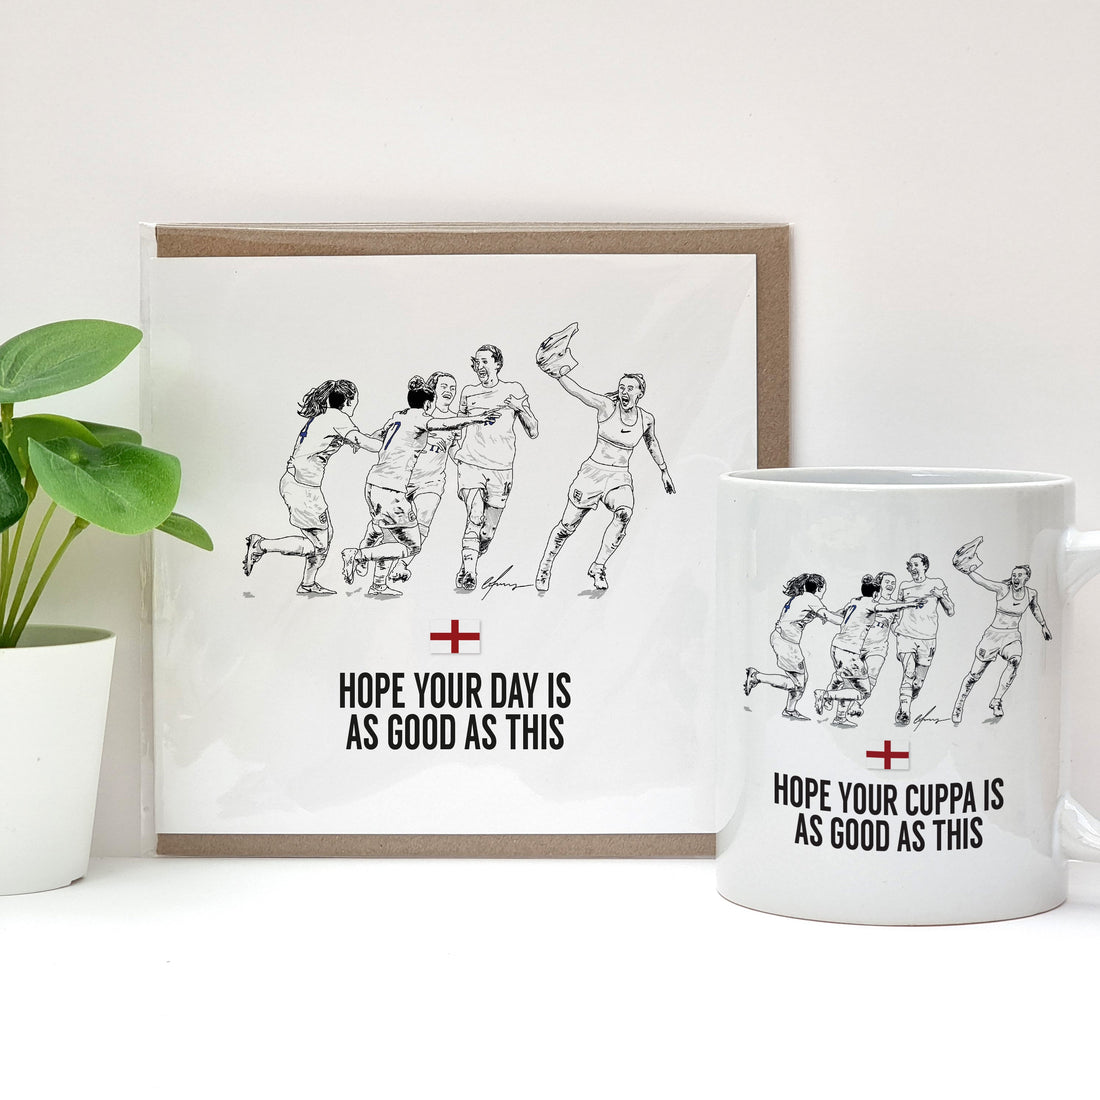 england womens football team illustration of the players celebrating, including jill scott & chloe kelly with her top off after scoring. Card & coffee mug designed by a town called home